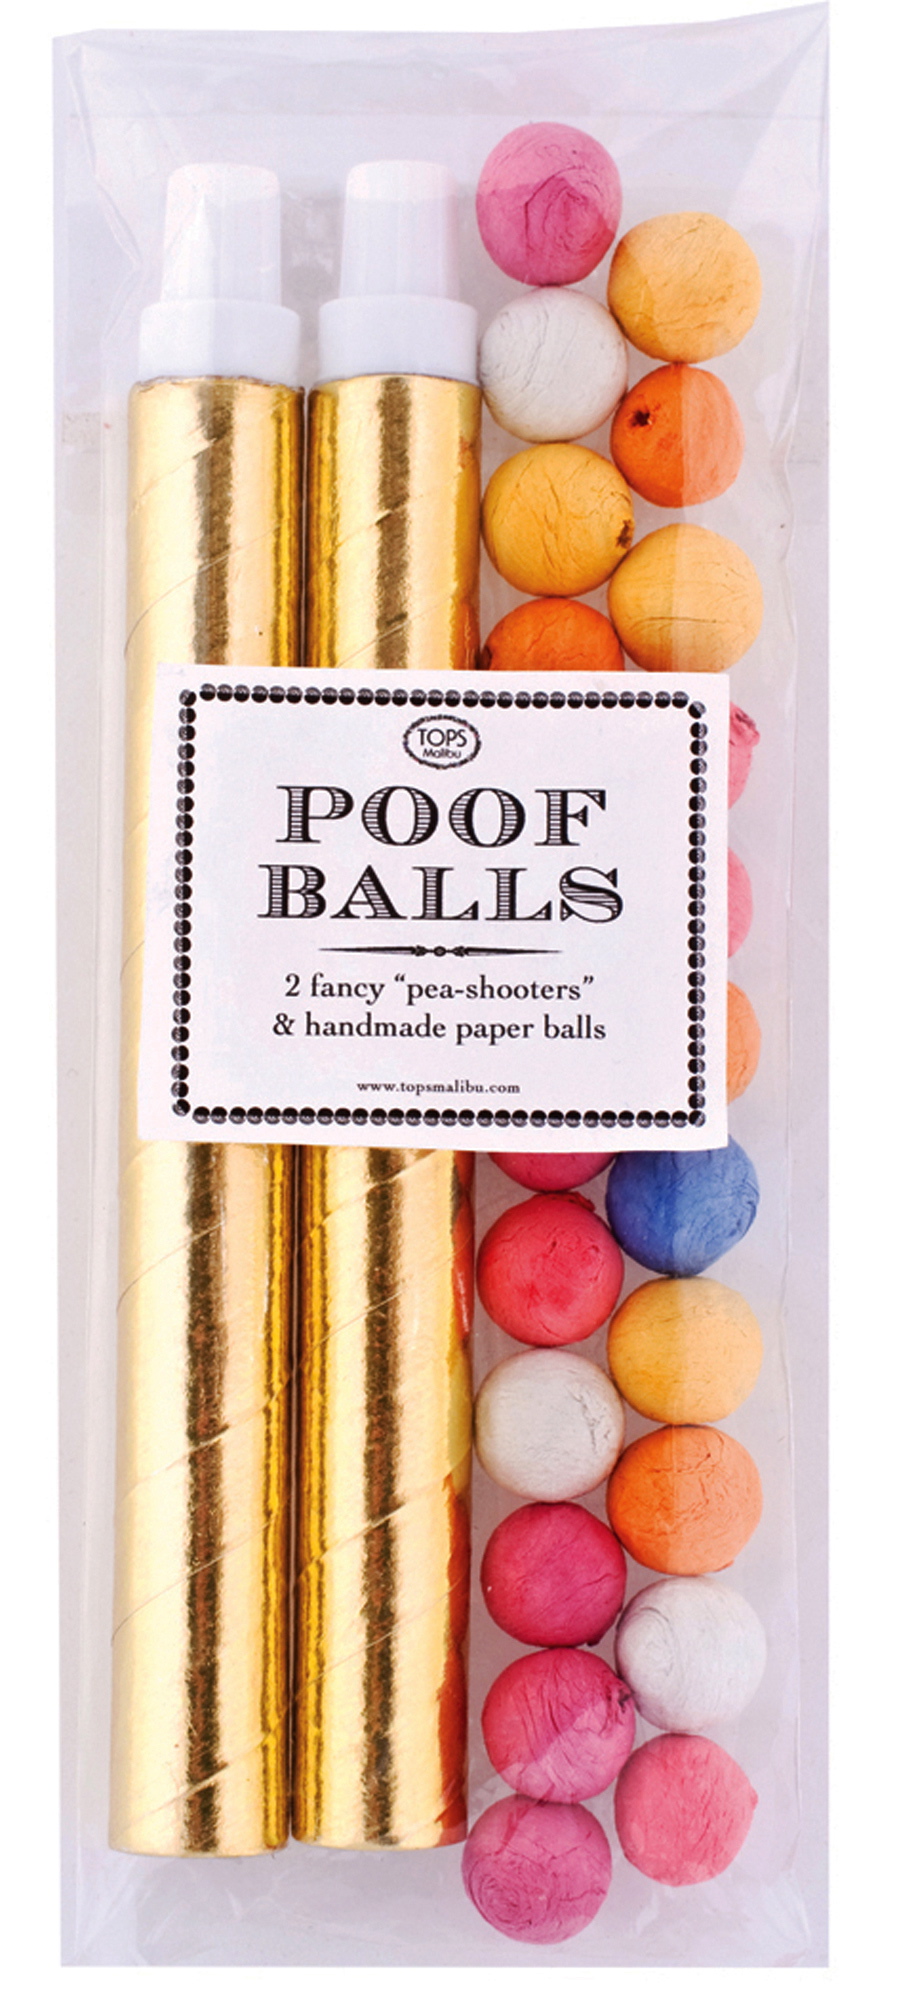 Poof Balls are a modern take on a traditional peashooter.